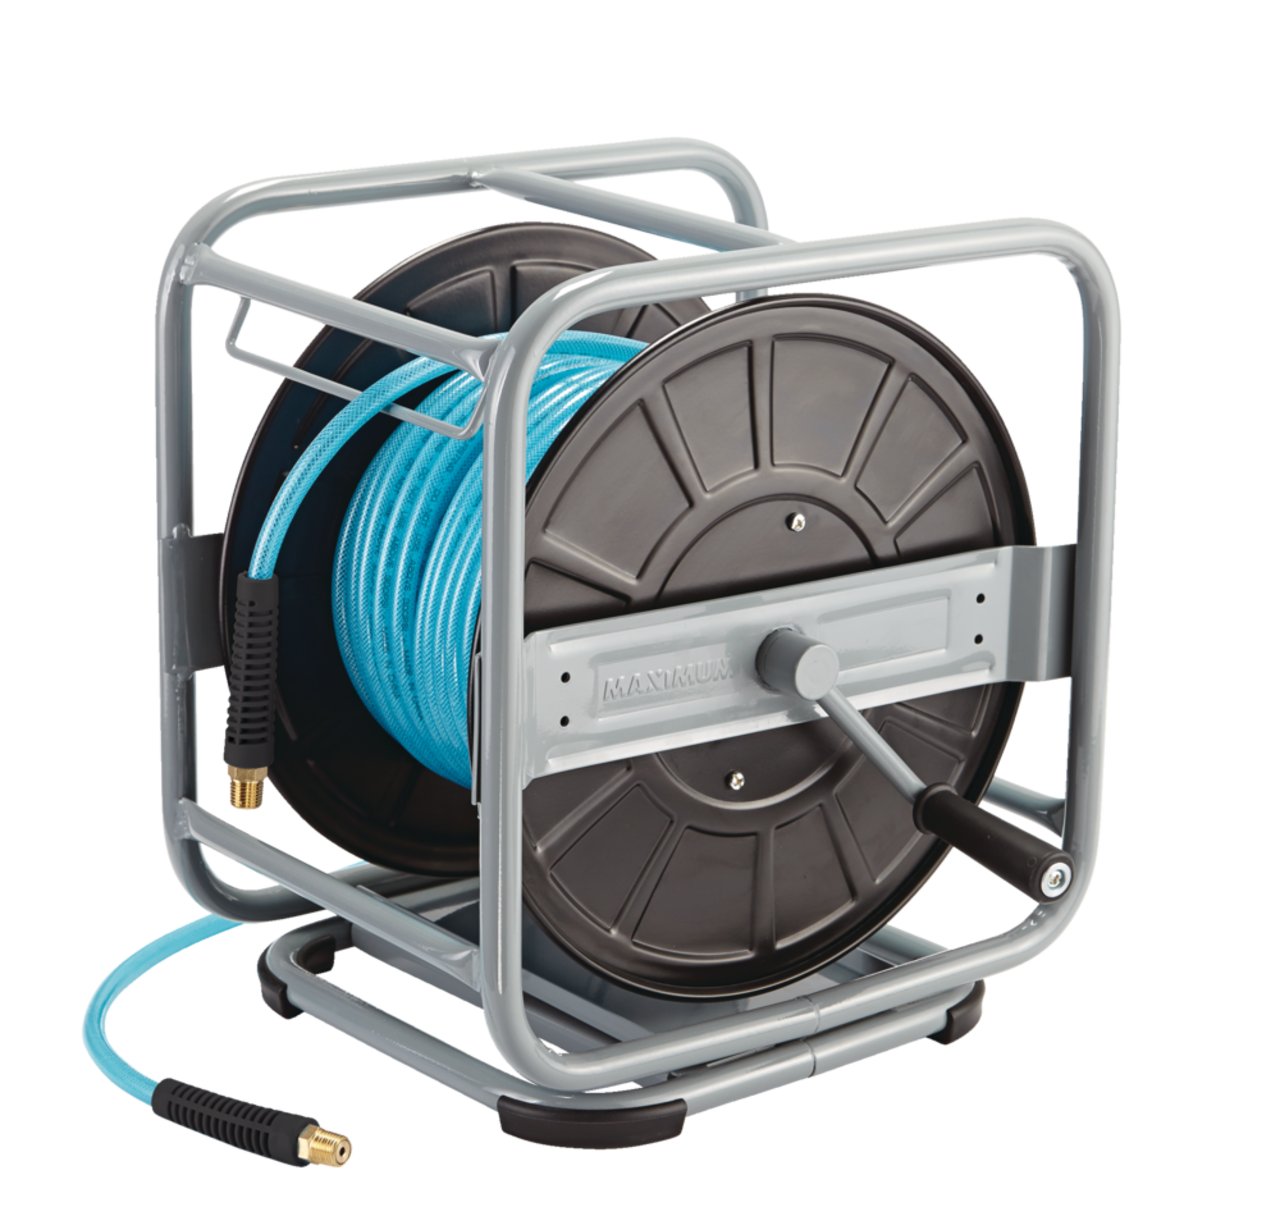 MAXIMUM Metal/Rubber Air Hose Reel with 360 Turn, 1/4-in x 100-ft